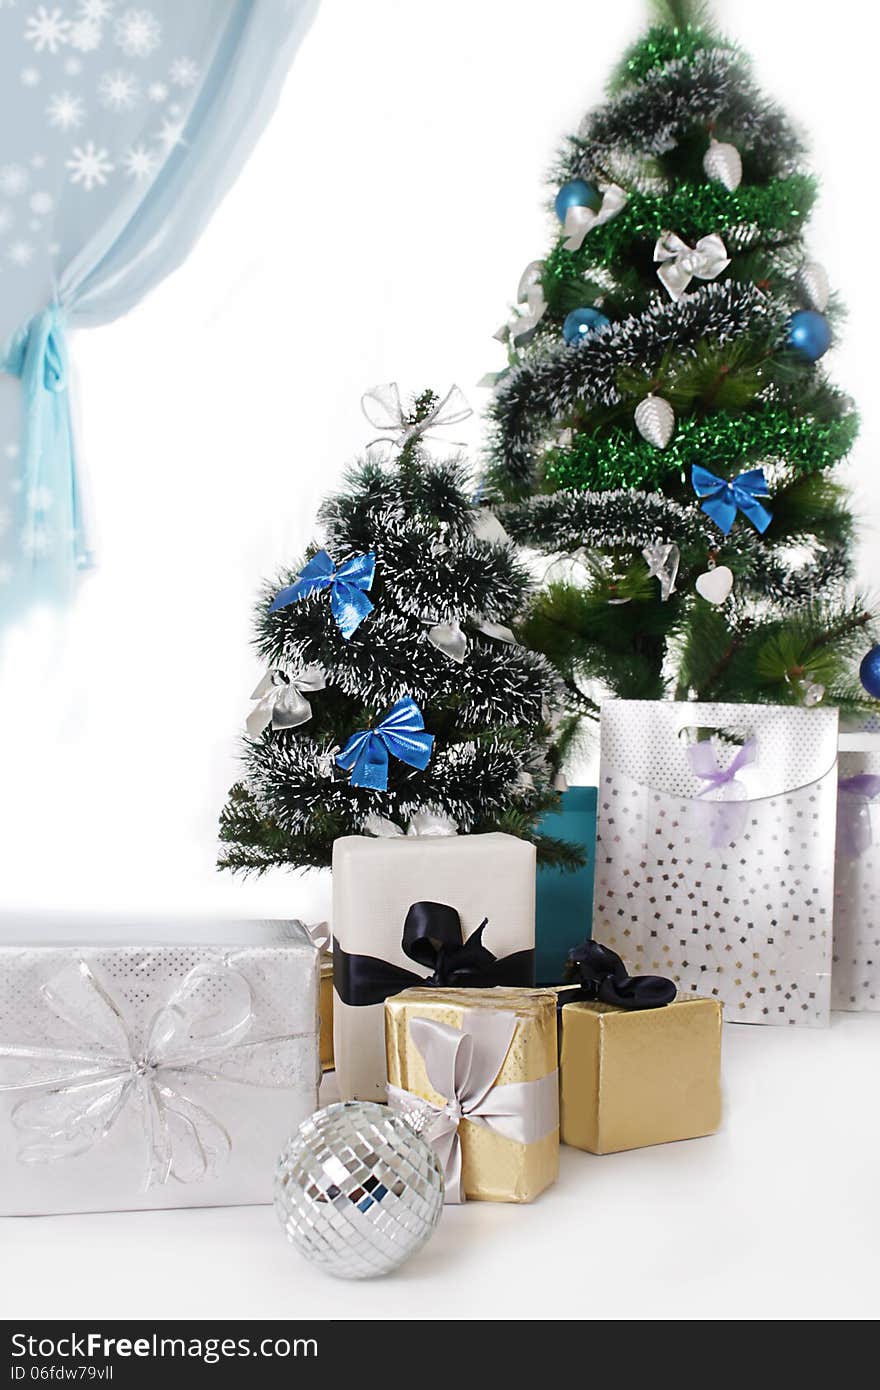 Christmas tree decorated with blue ornaments and presents over white